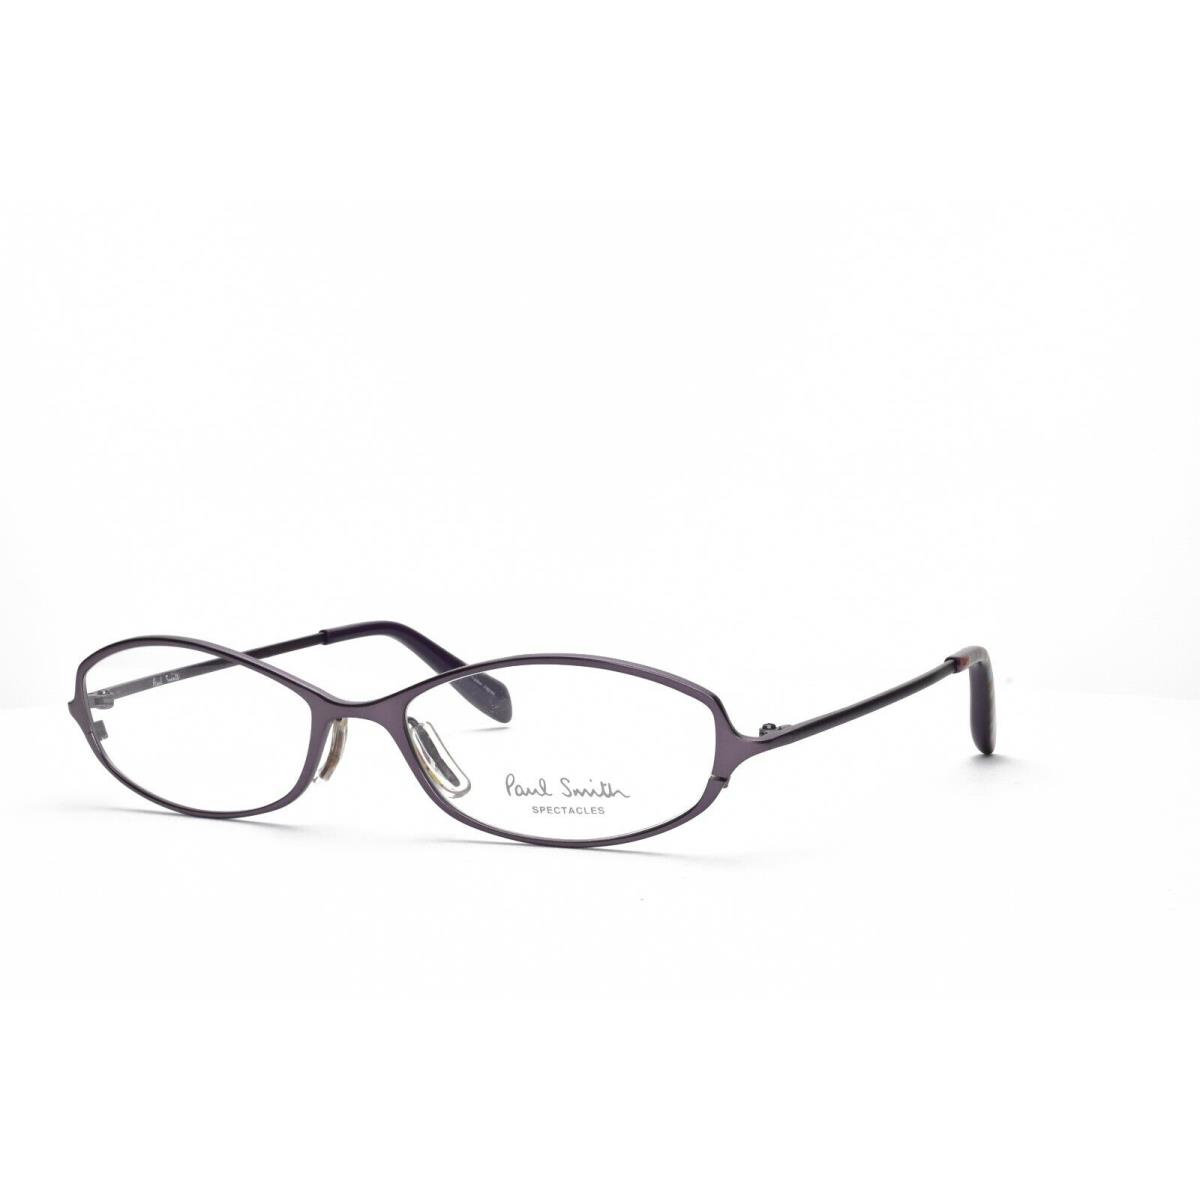 Paul Smith PS 199 Pur Eyeglasses Frames Only 51-16-130